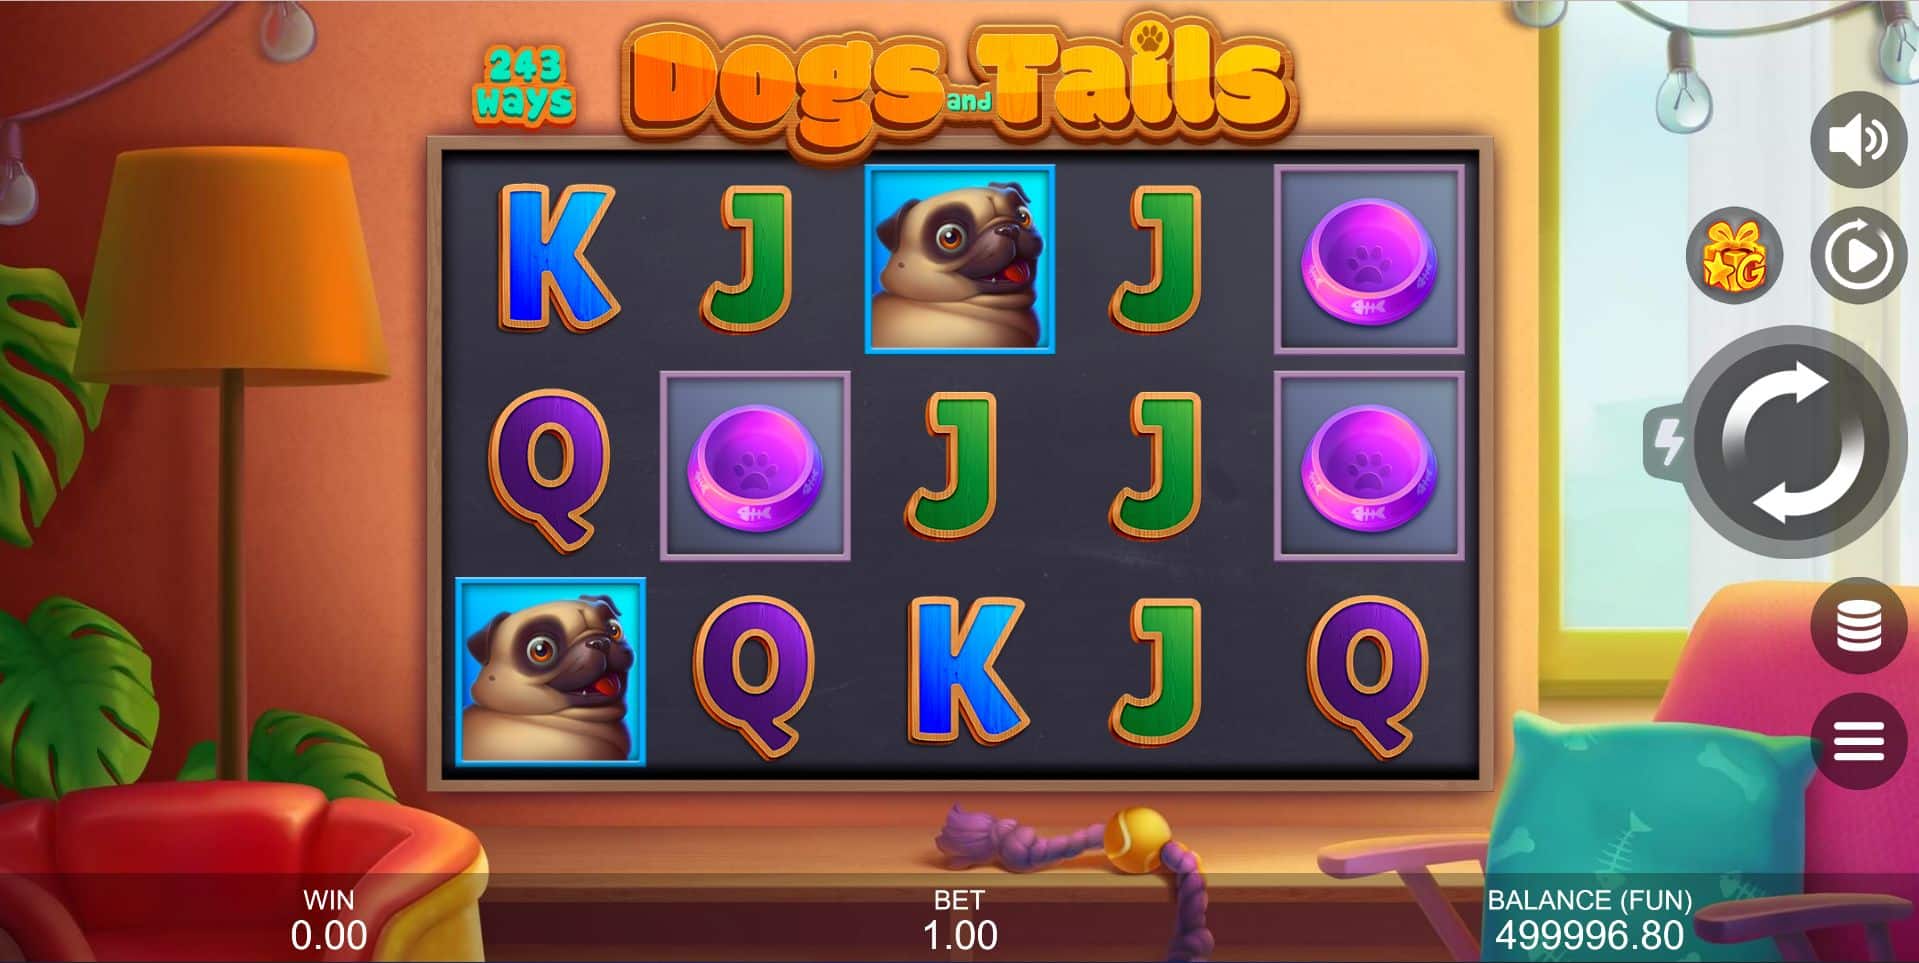 Dogs and Tails Base Game